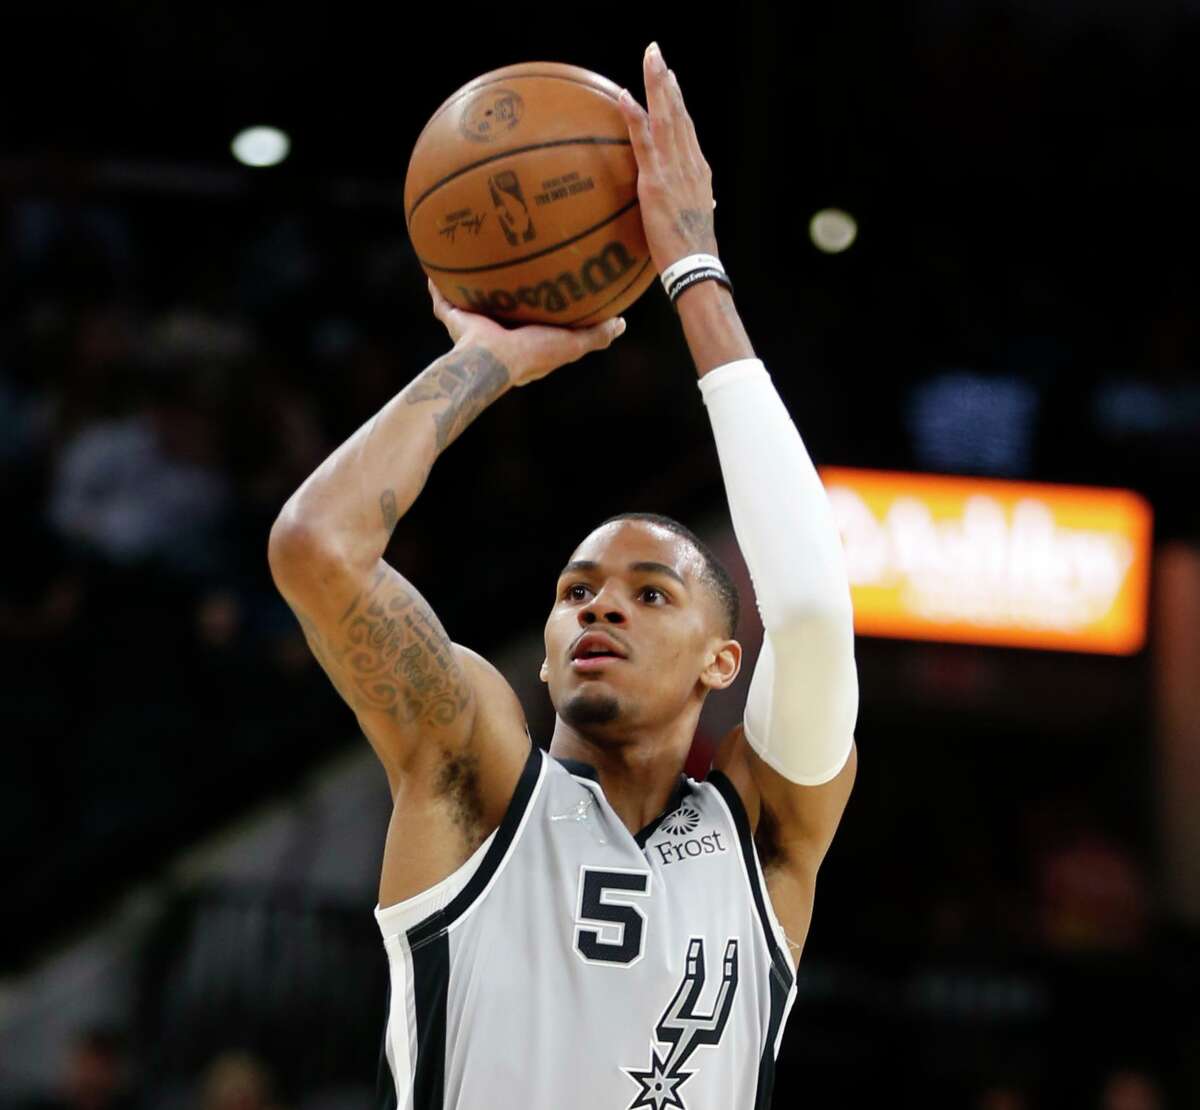 Gregg Popovich likens All-Star guard Dejounte Murray to Tim Duncan in the way he patiently prods his teammates to improve.